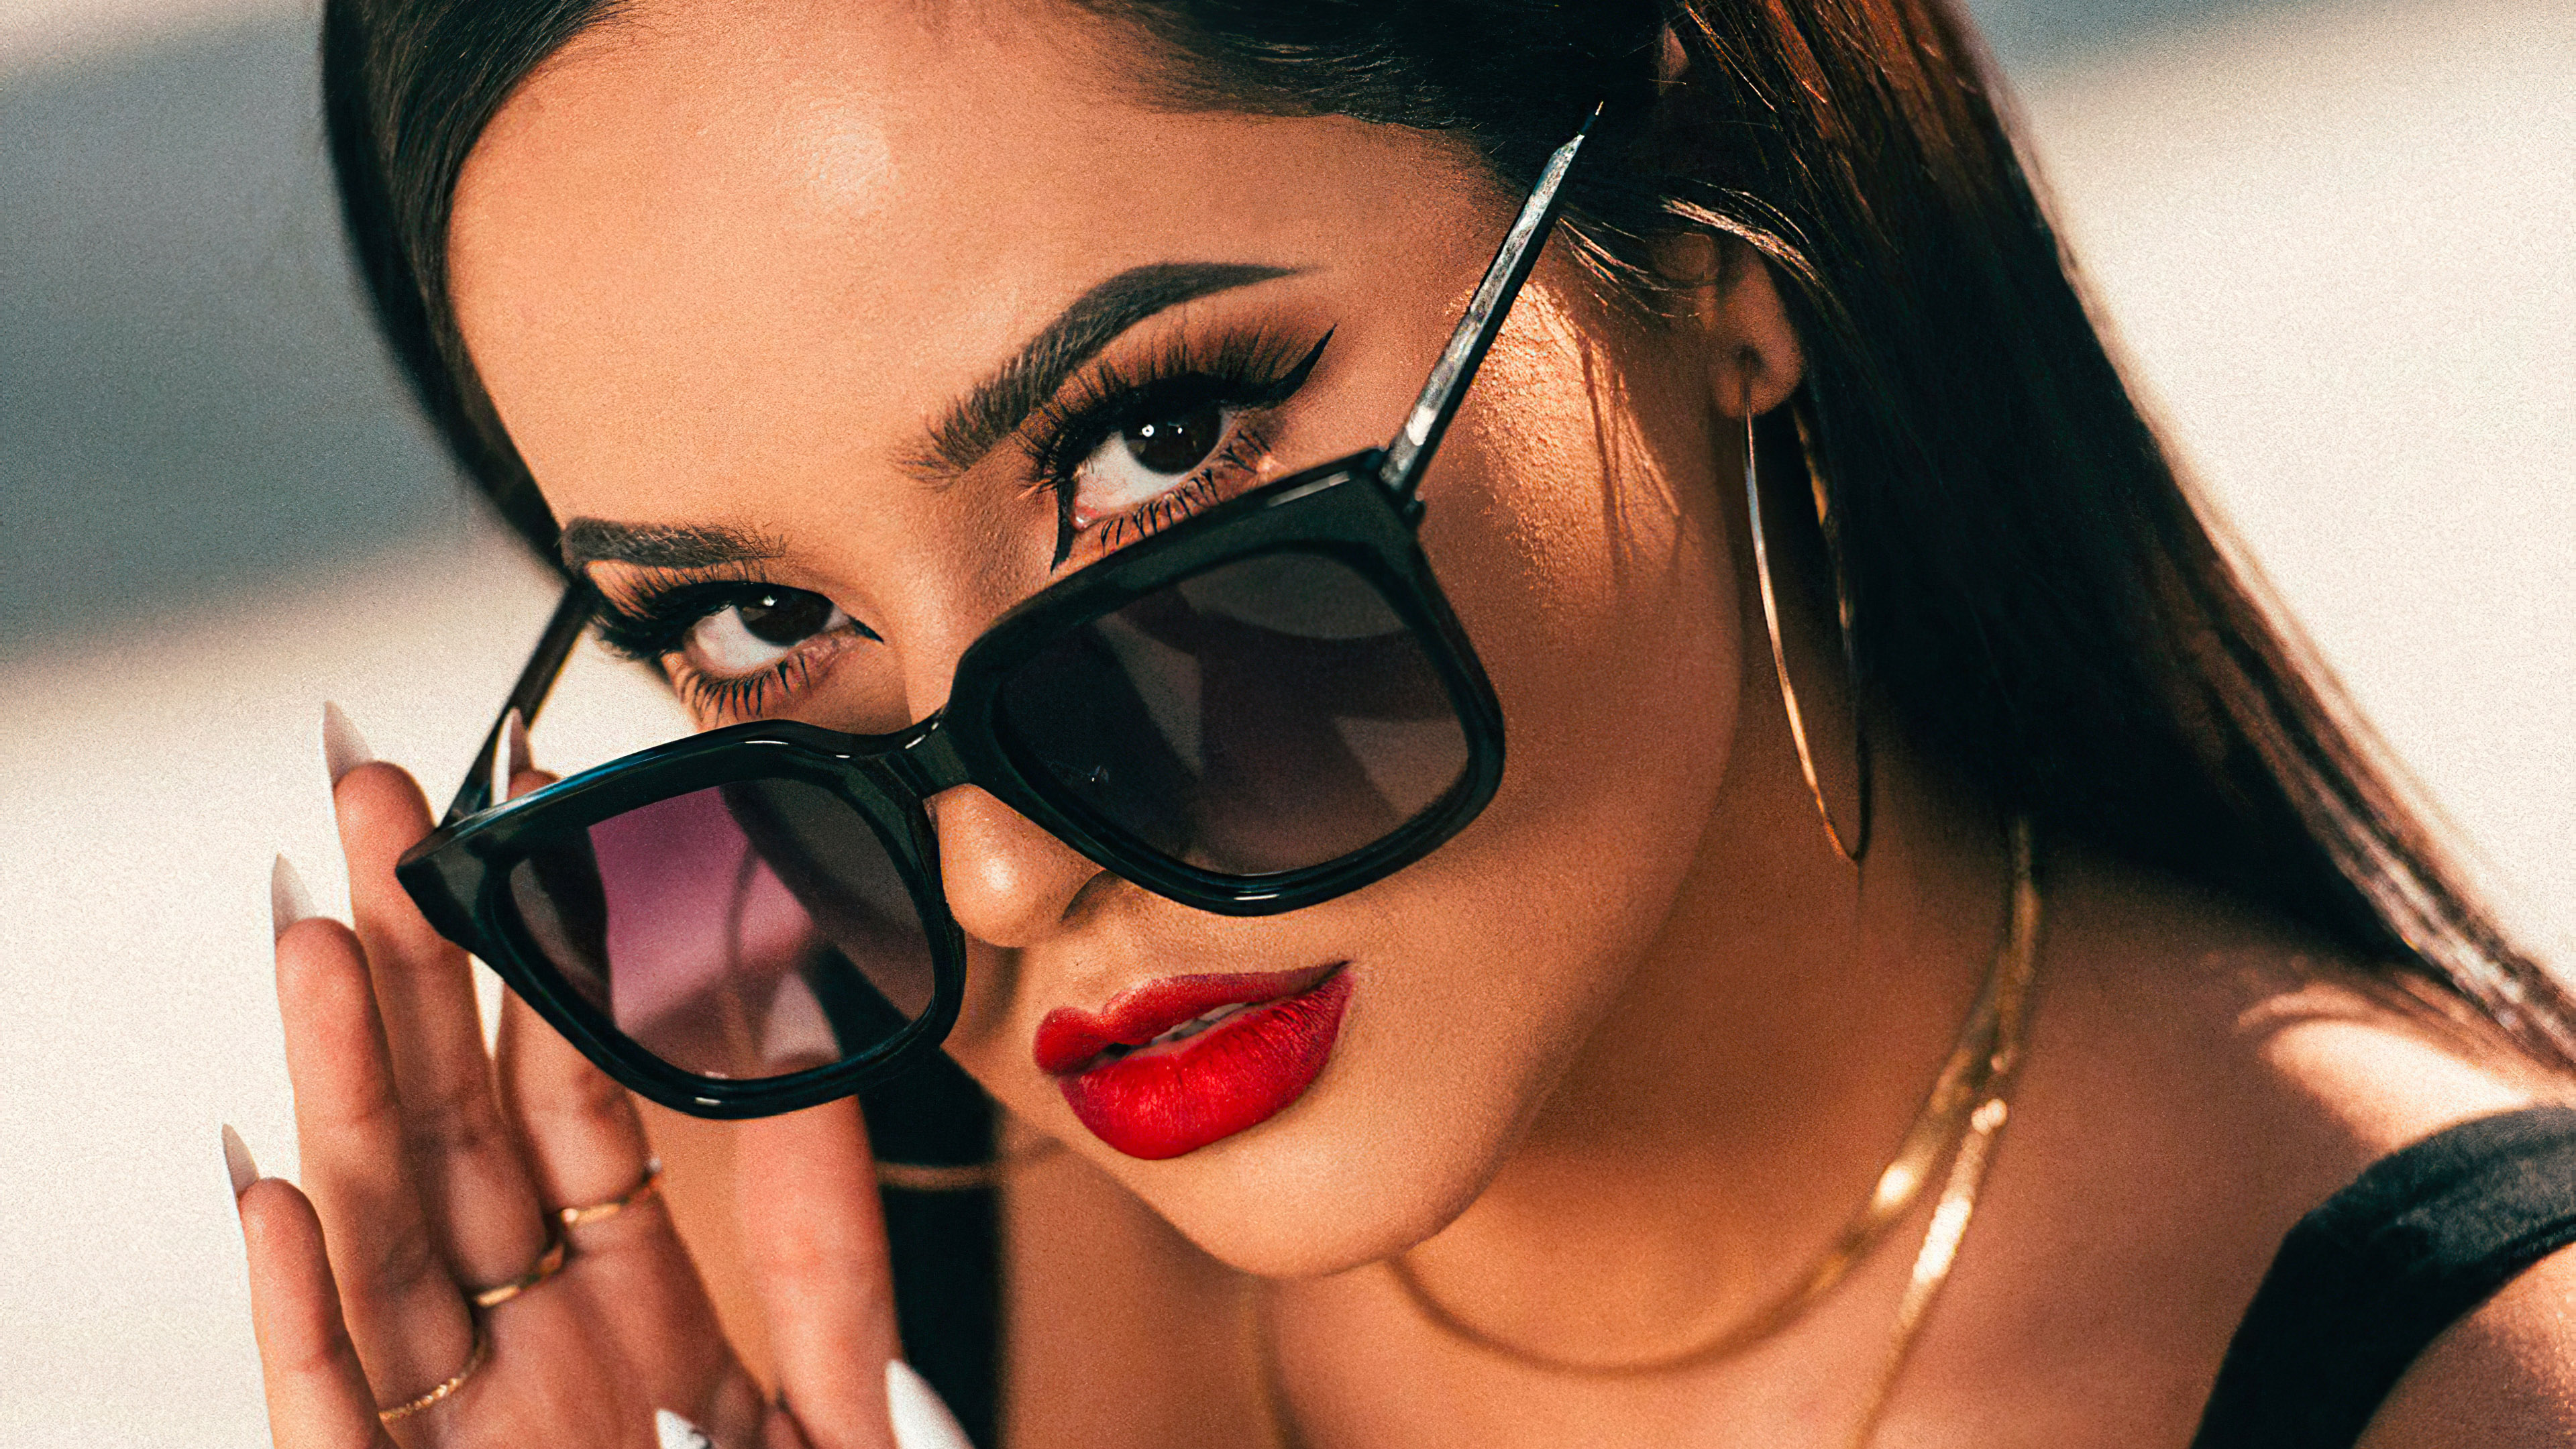 Becky G X Dime Is Holding Sunglasses On Nose And Black Dress With Gold Chains On Neck K 2K Celebrities